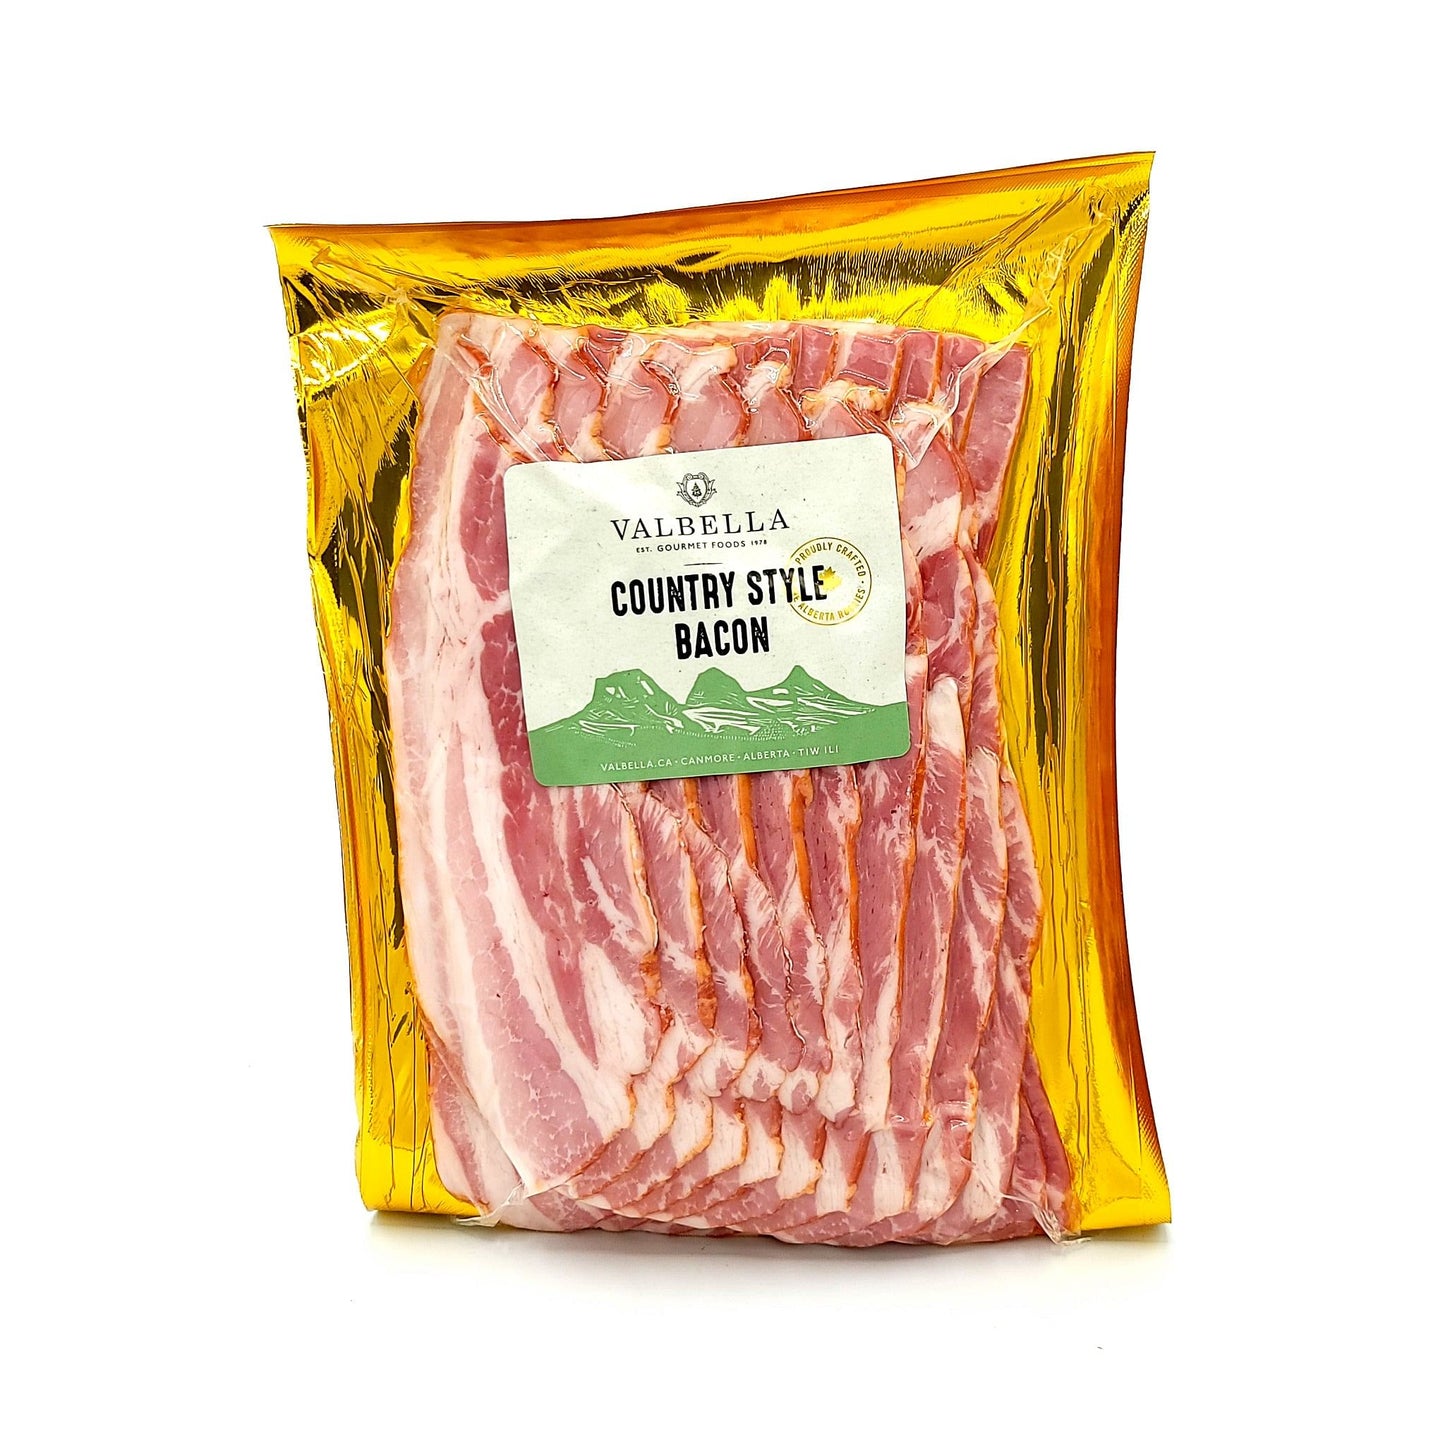 Country Style Bacon - Valbella Gourmet Foods